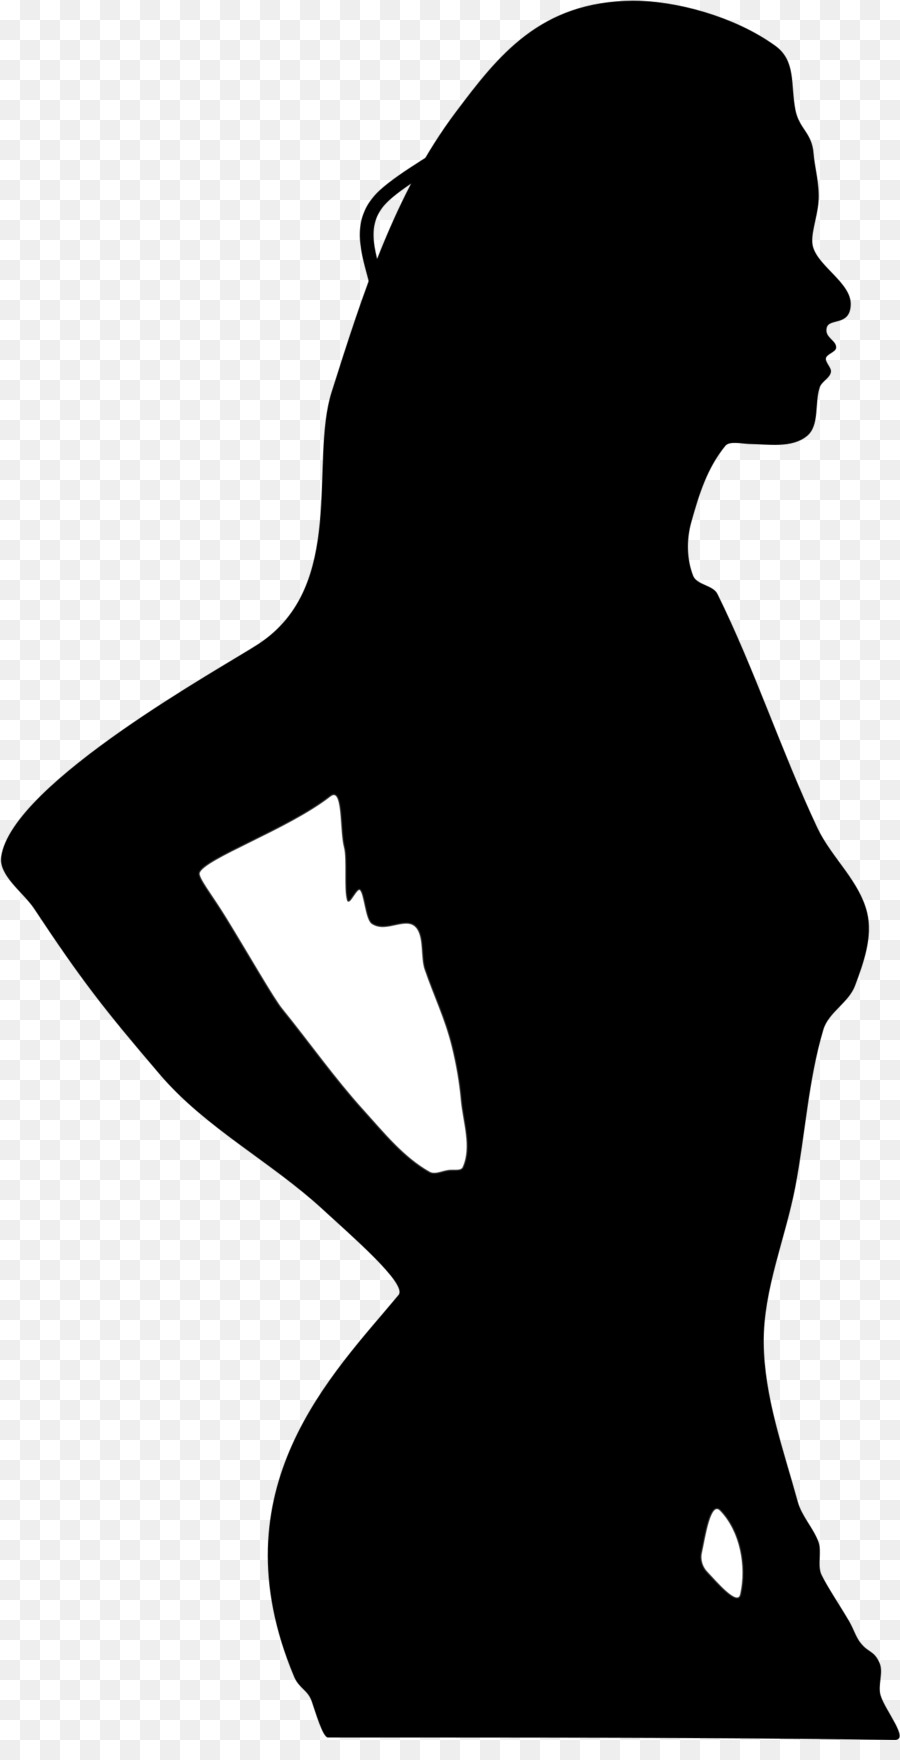 Silhouette Clip art - female vector png download - 2400*2400 - Free Transparent Silhouette png Download.